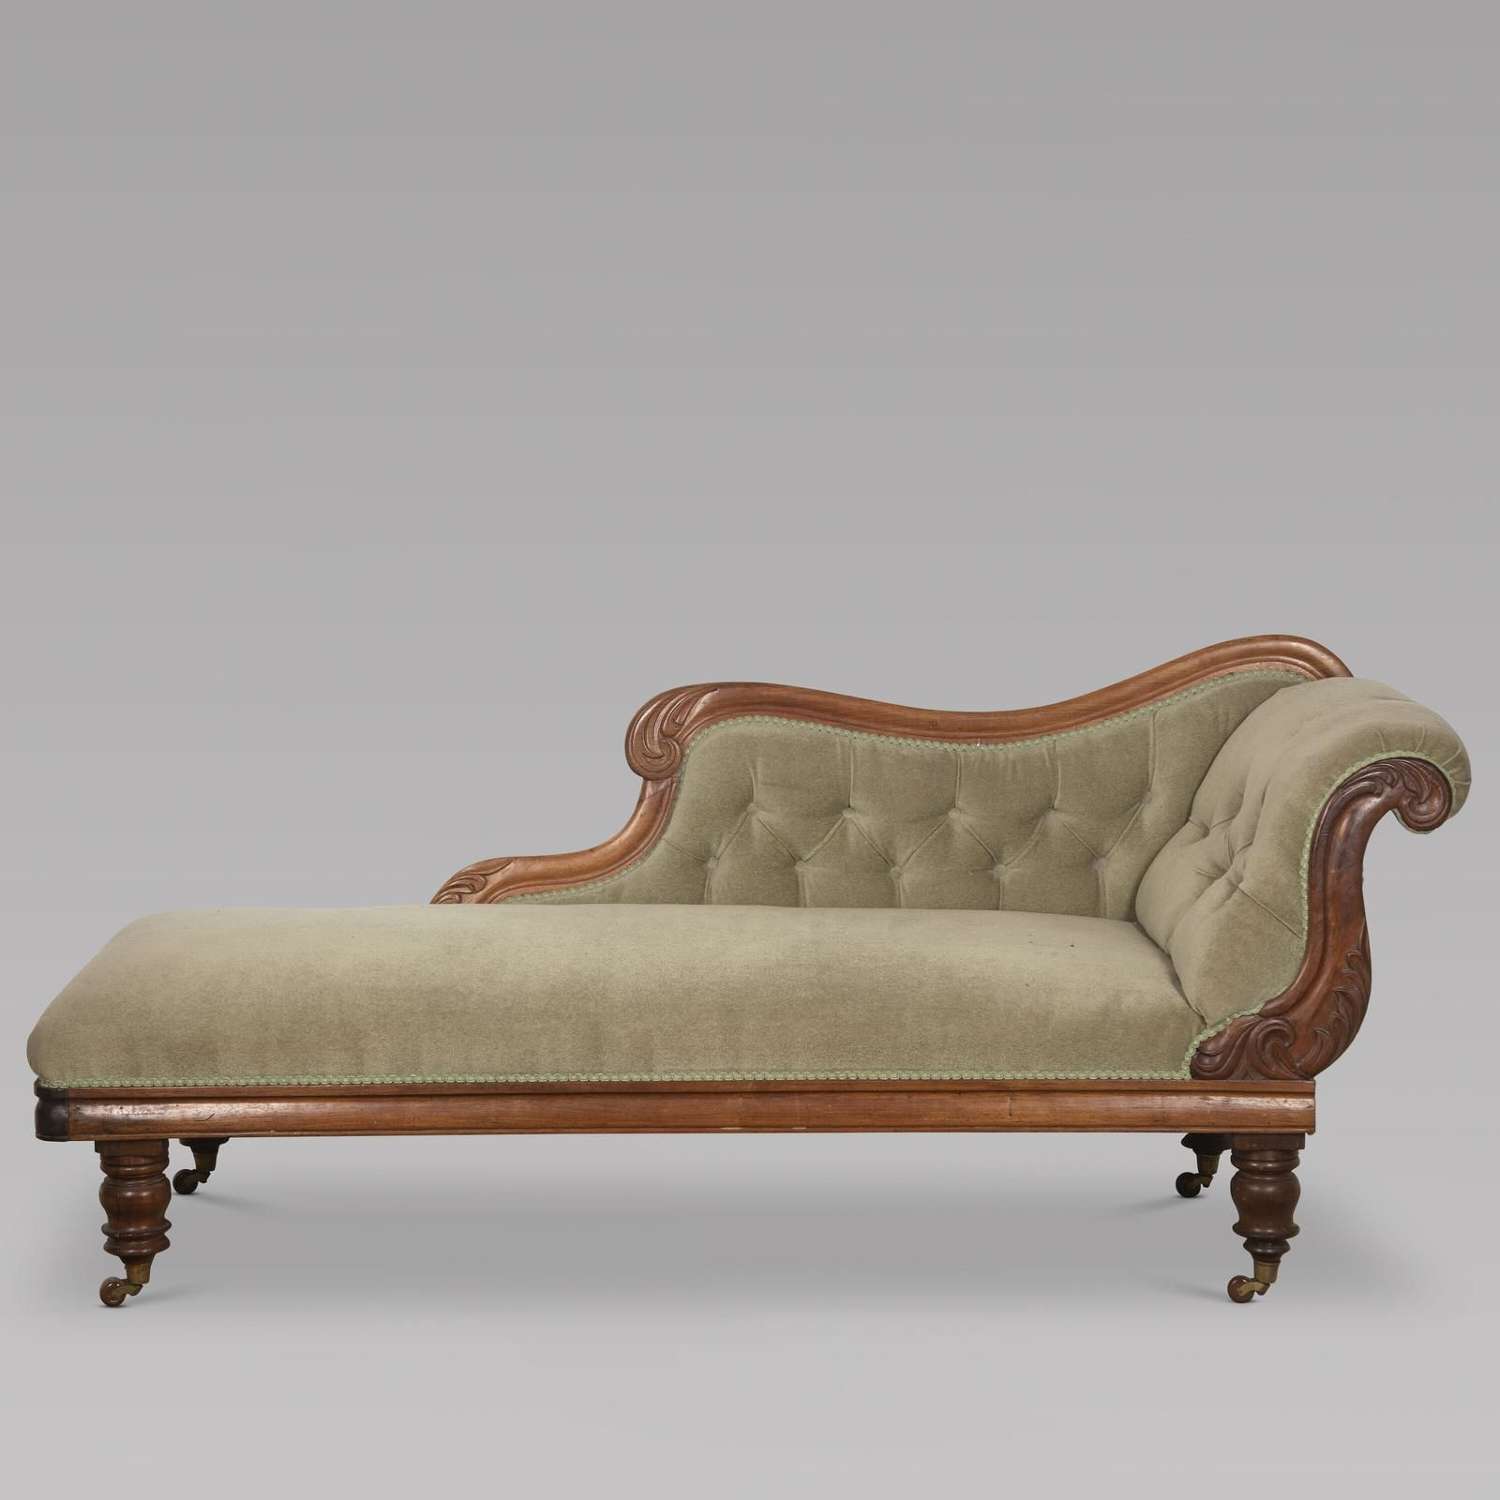 19th Century English Buttoned Upholstered Chaise Longue